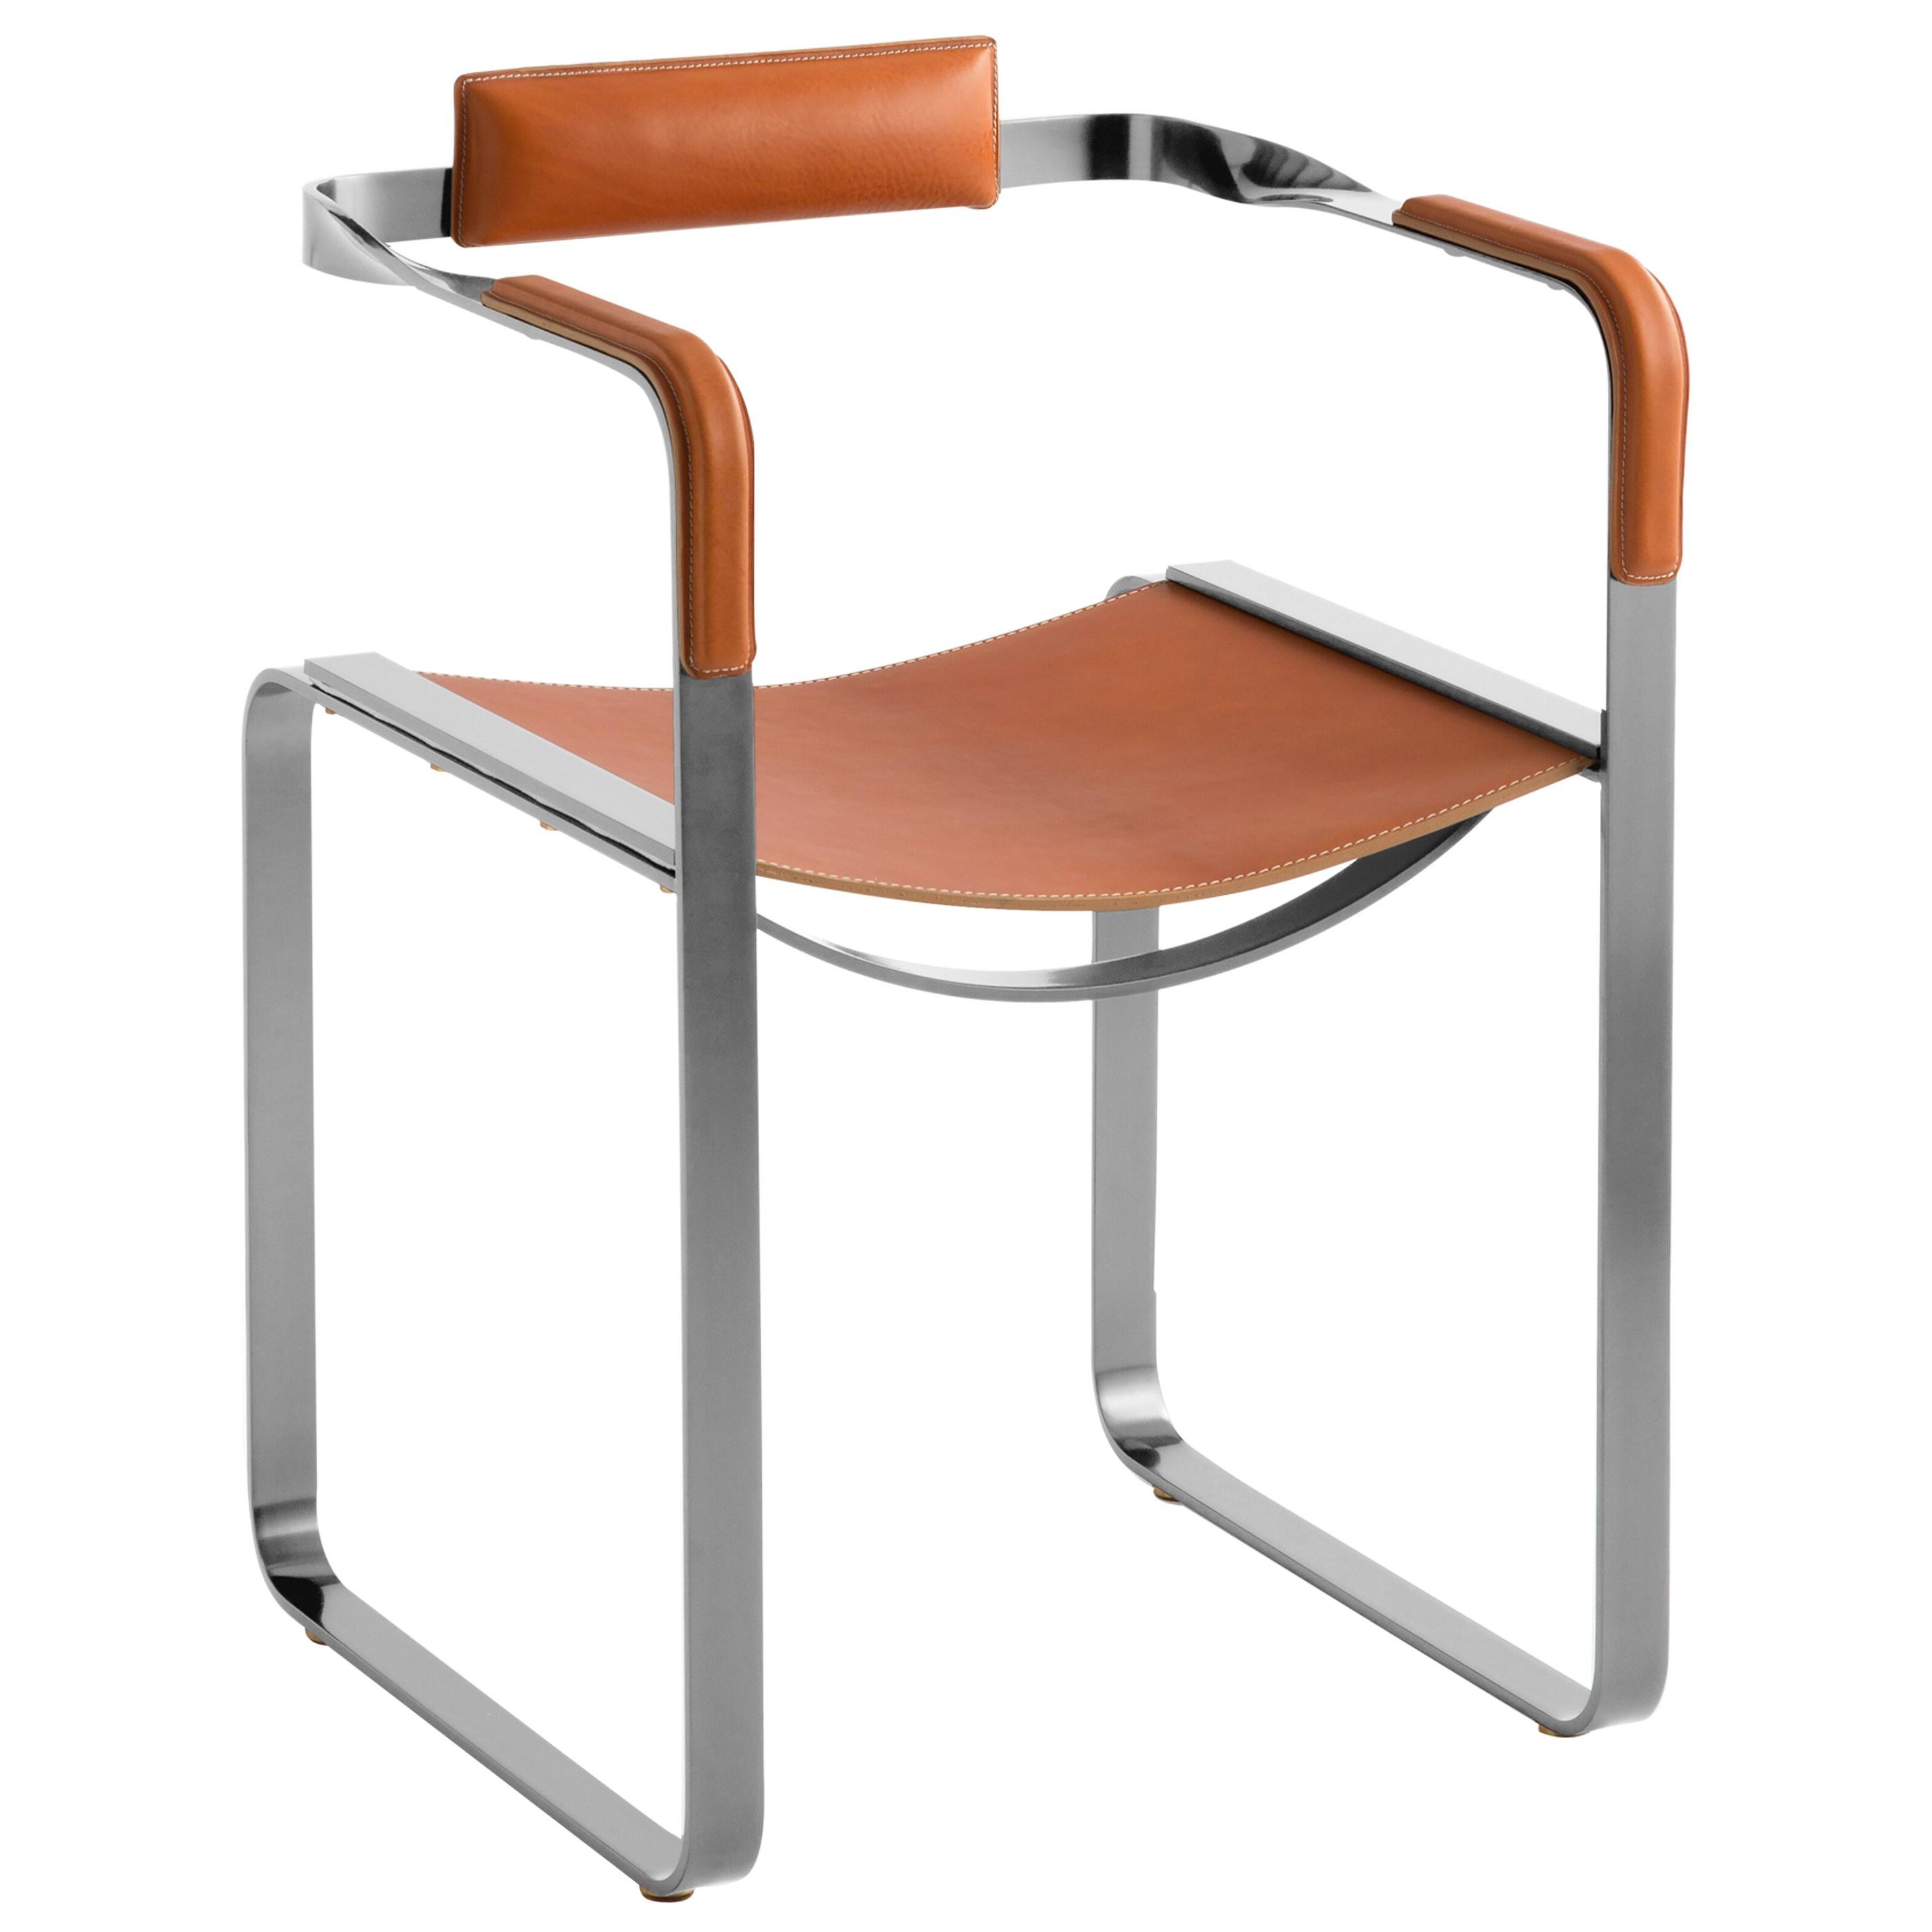 Sessel, Old Silver Steel & Natural Tobacco Saddle Leather, Contemporary Style